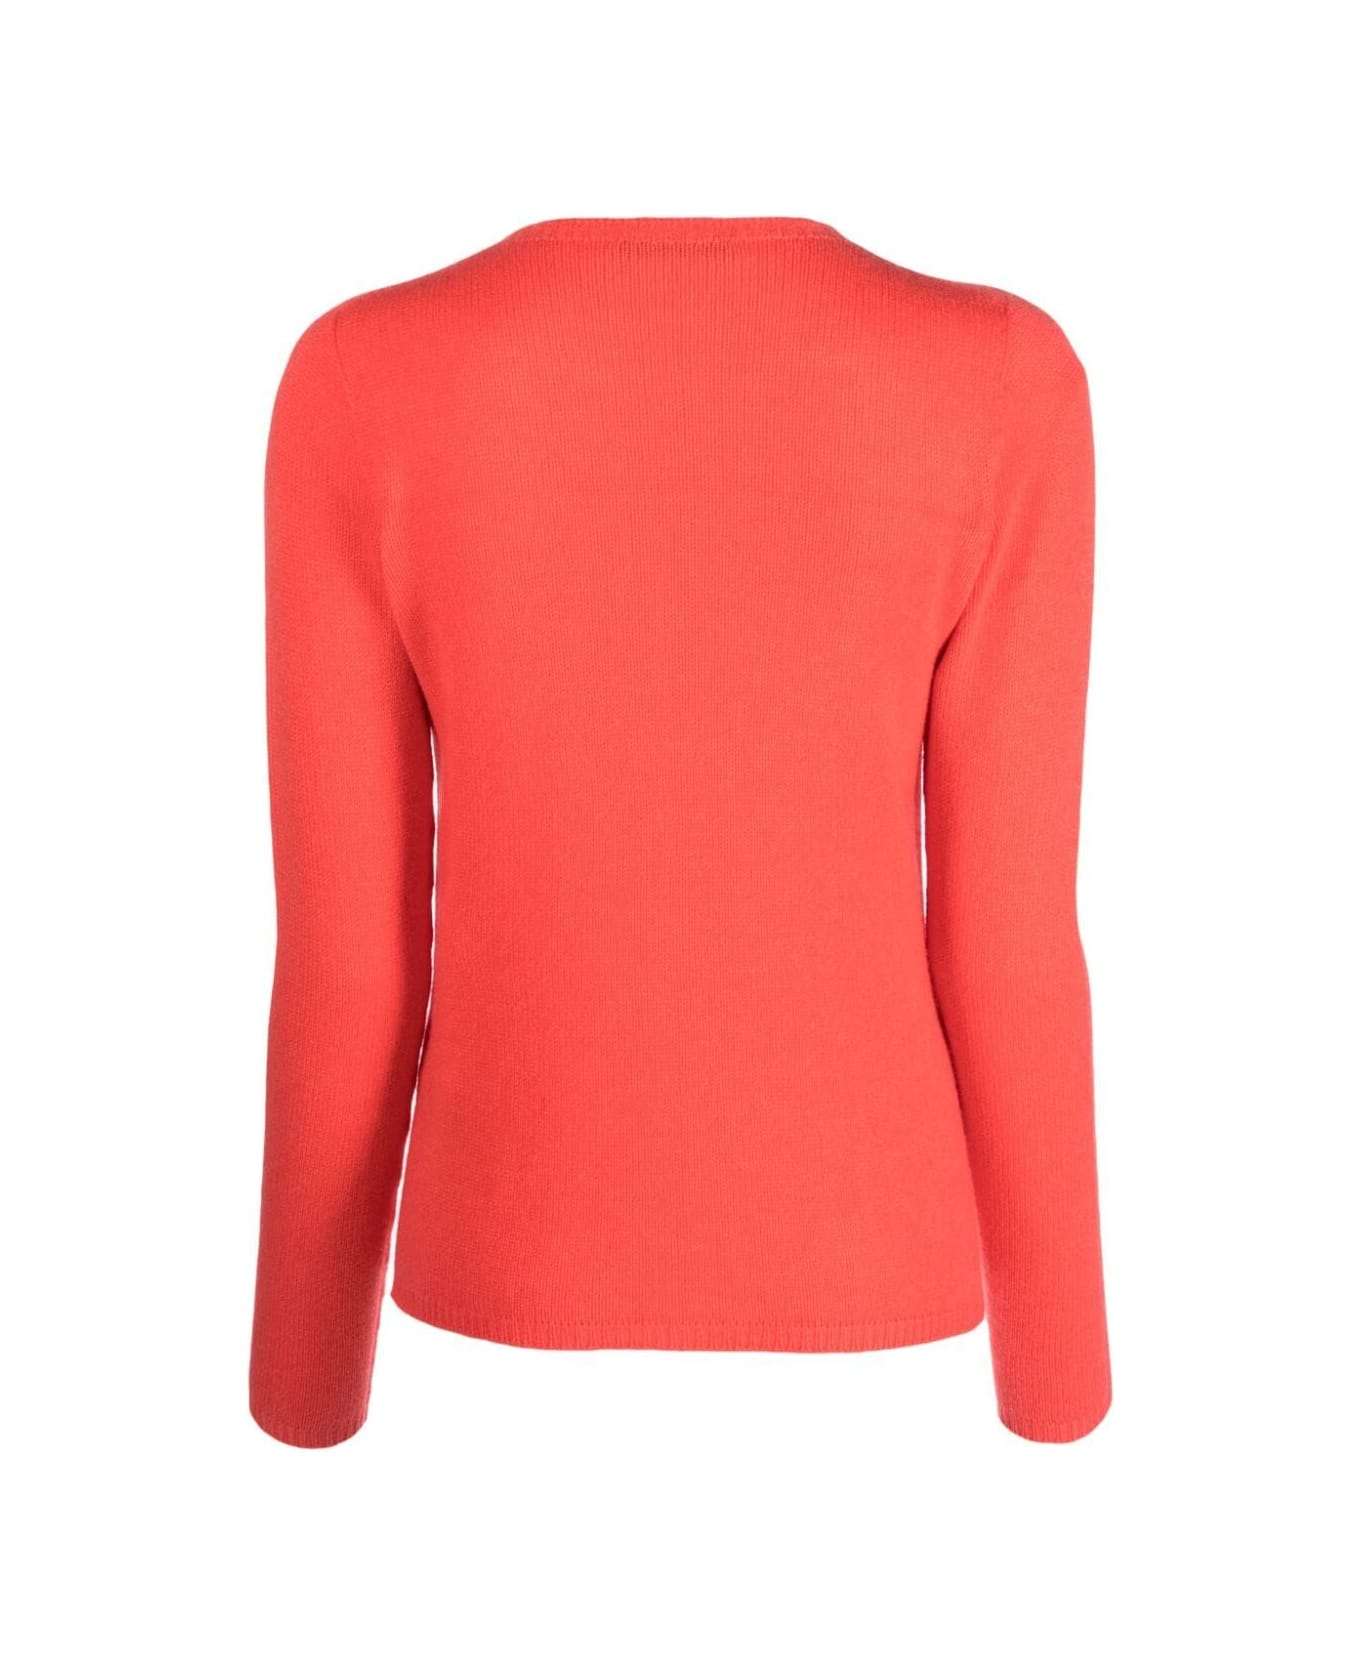 Nuur Crew Neck Sweater - Coral ニットウェア